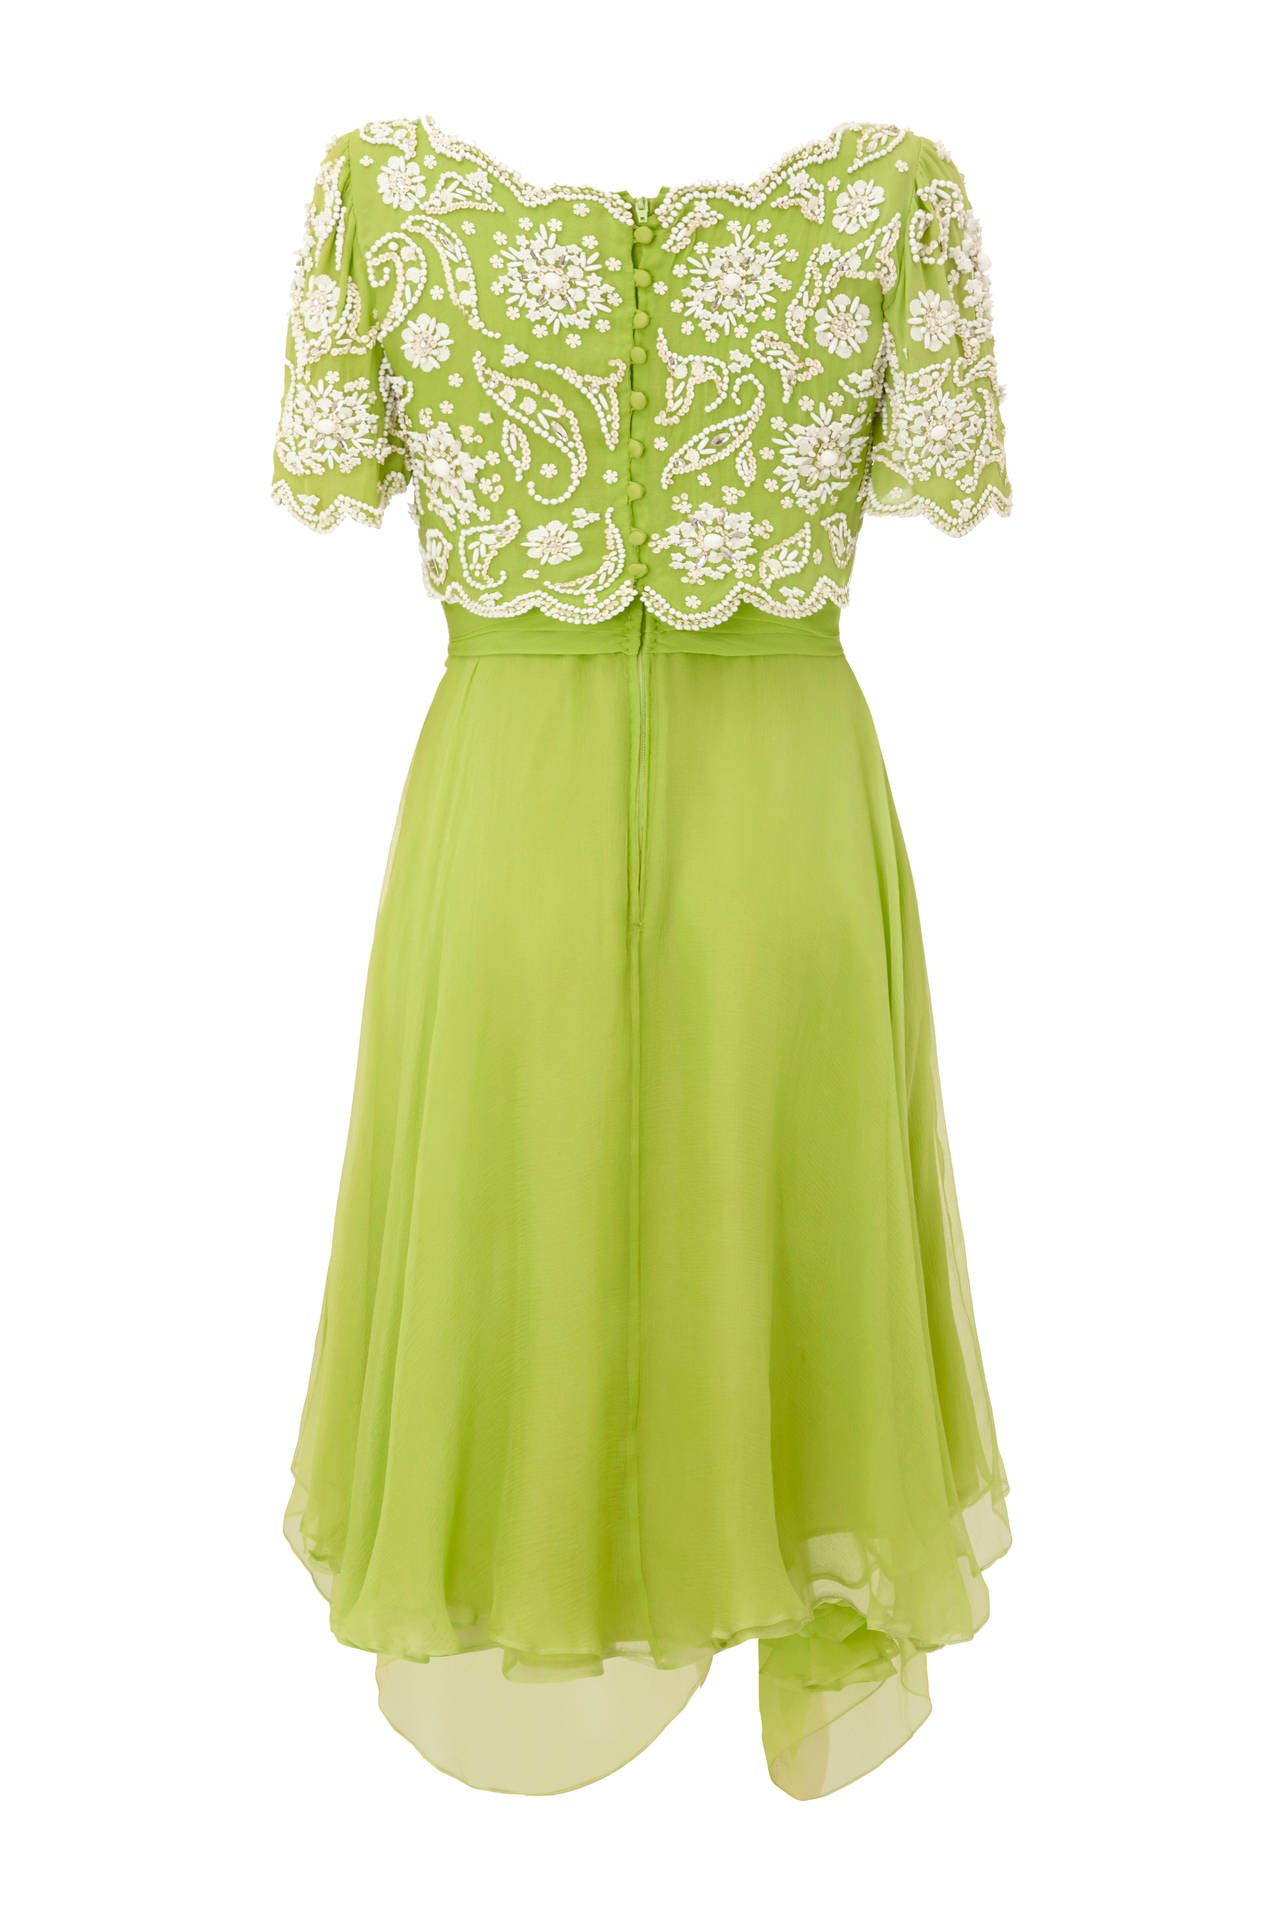 Gorgeous lime green silk chiffon layered dress with white beads and sequins in an intricate pattern on a scalloped edged bodice.  This stunning piece from British designer Ian Thomas, who famously designed for The Queen, features a draped skirt,